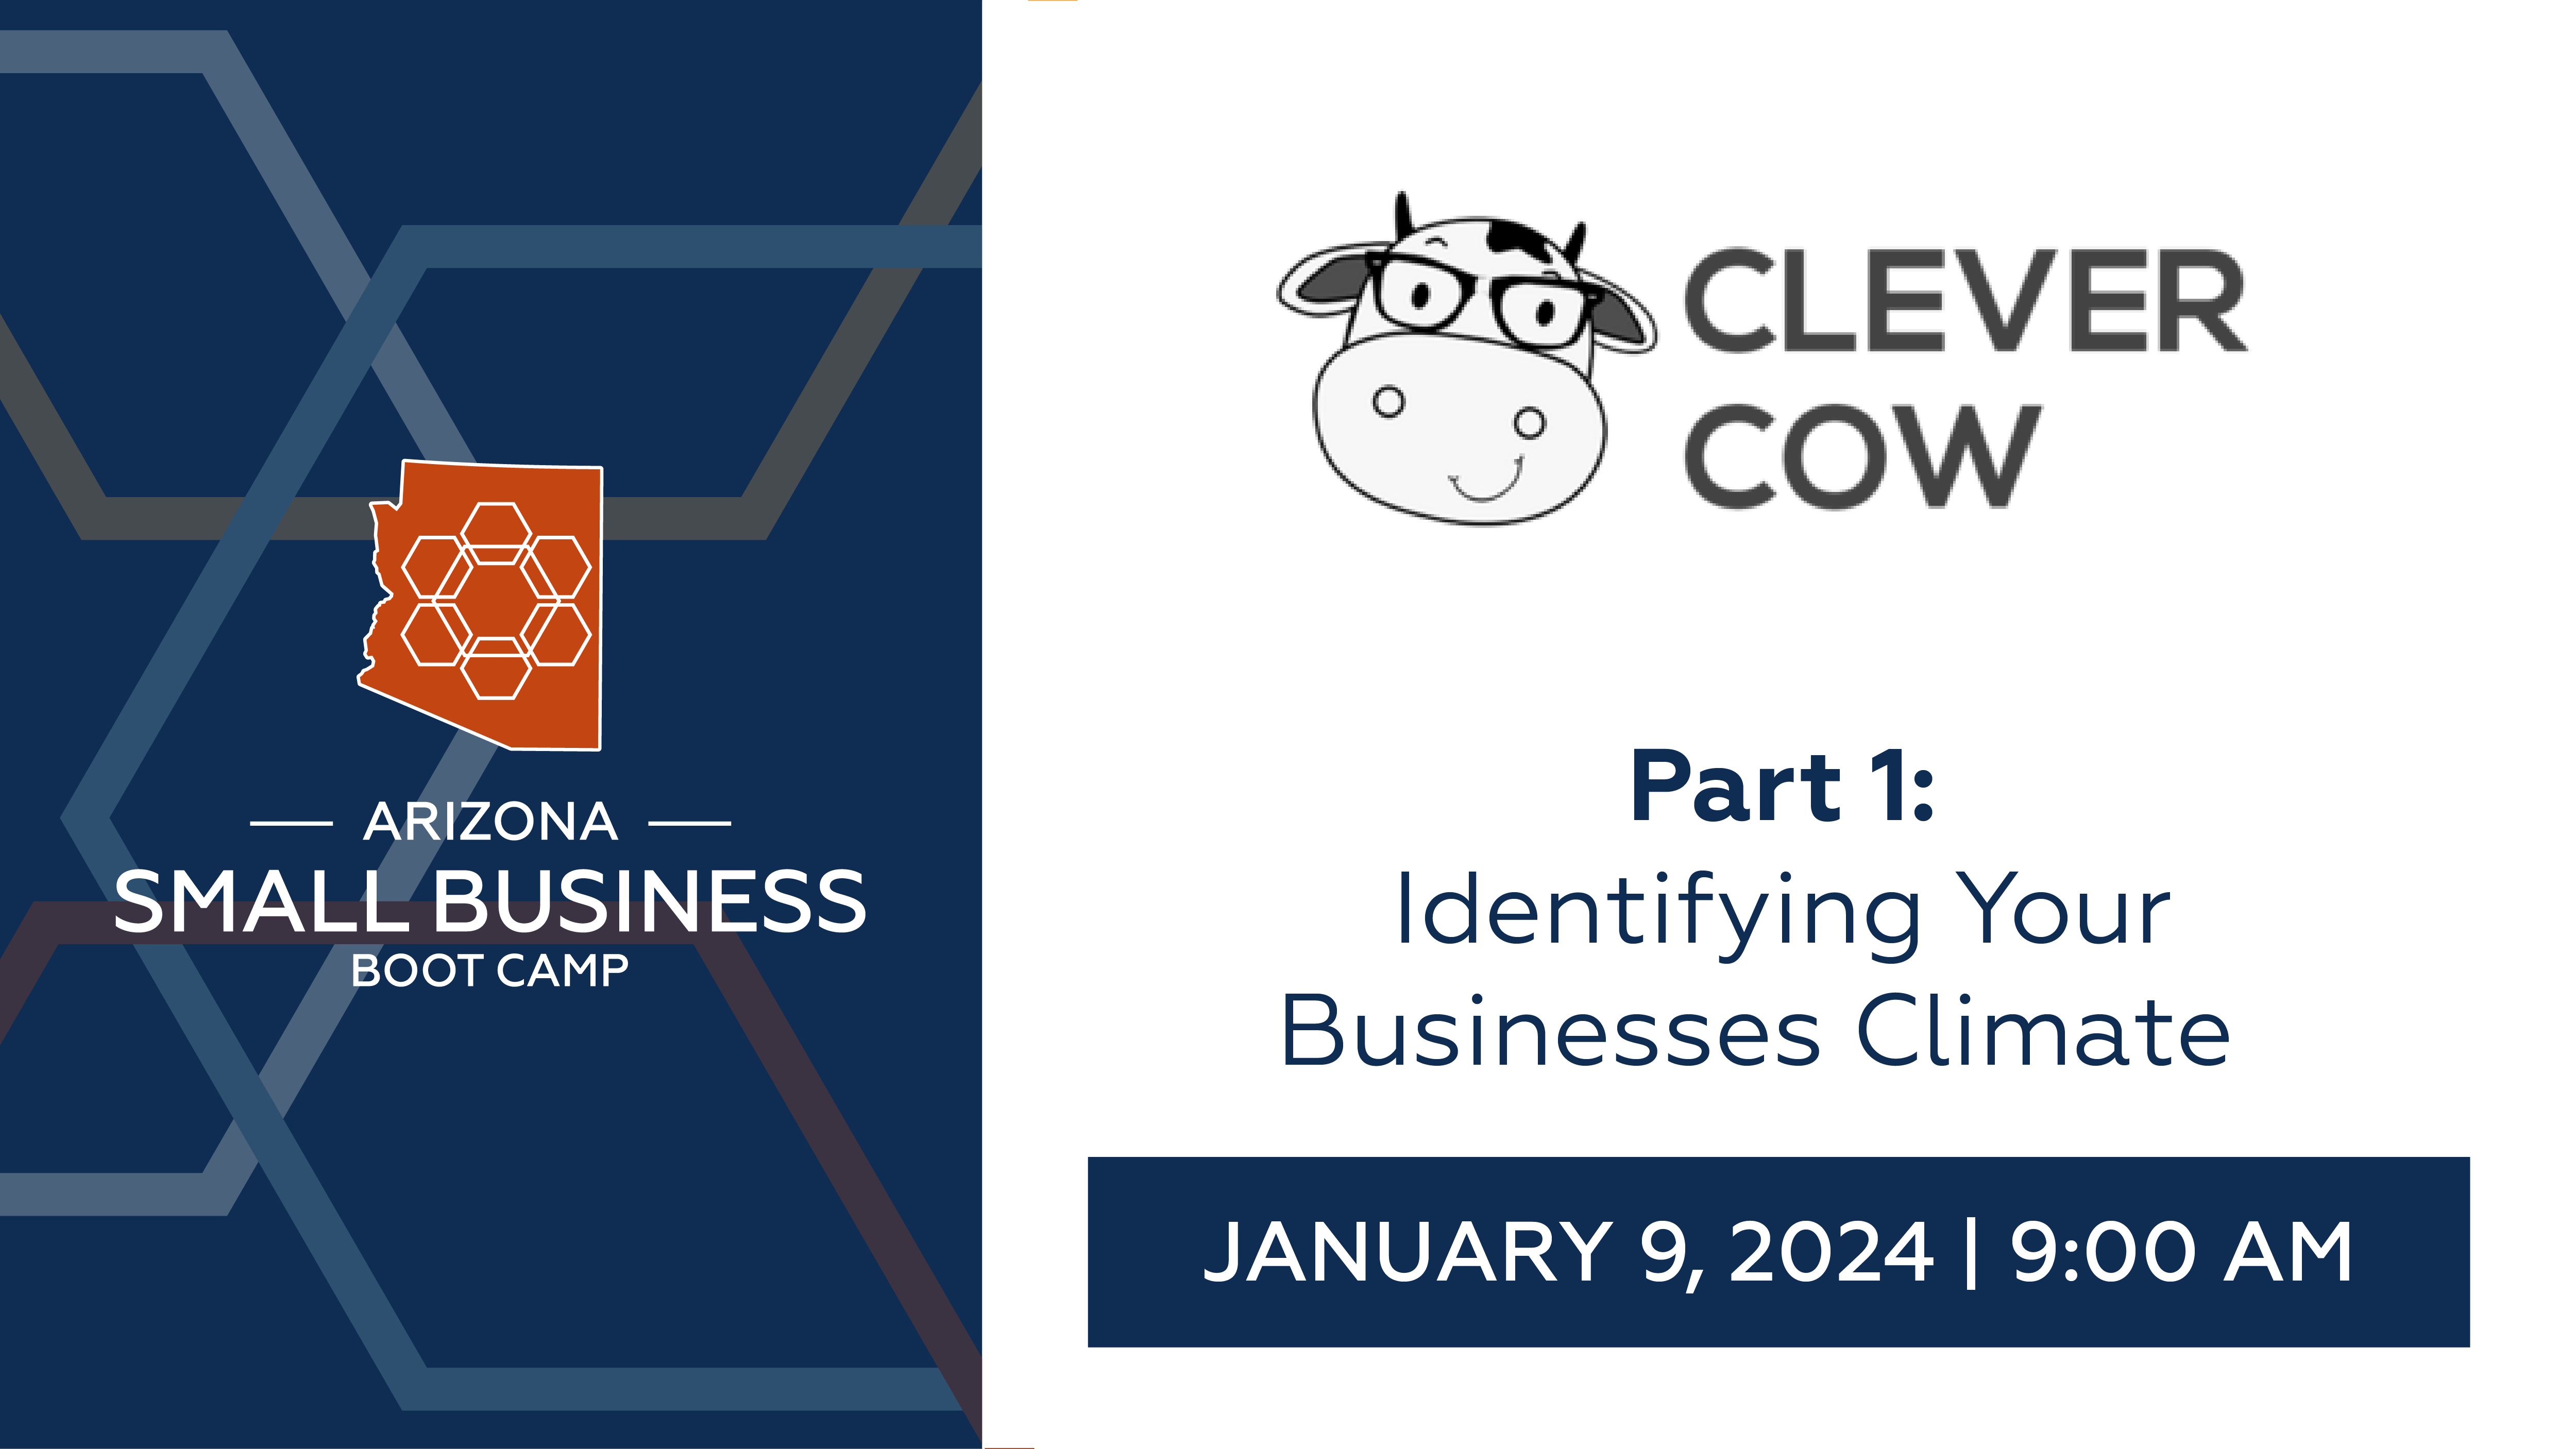 Part 1: Identifying Your Businesses Climate